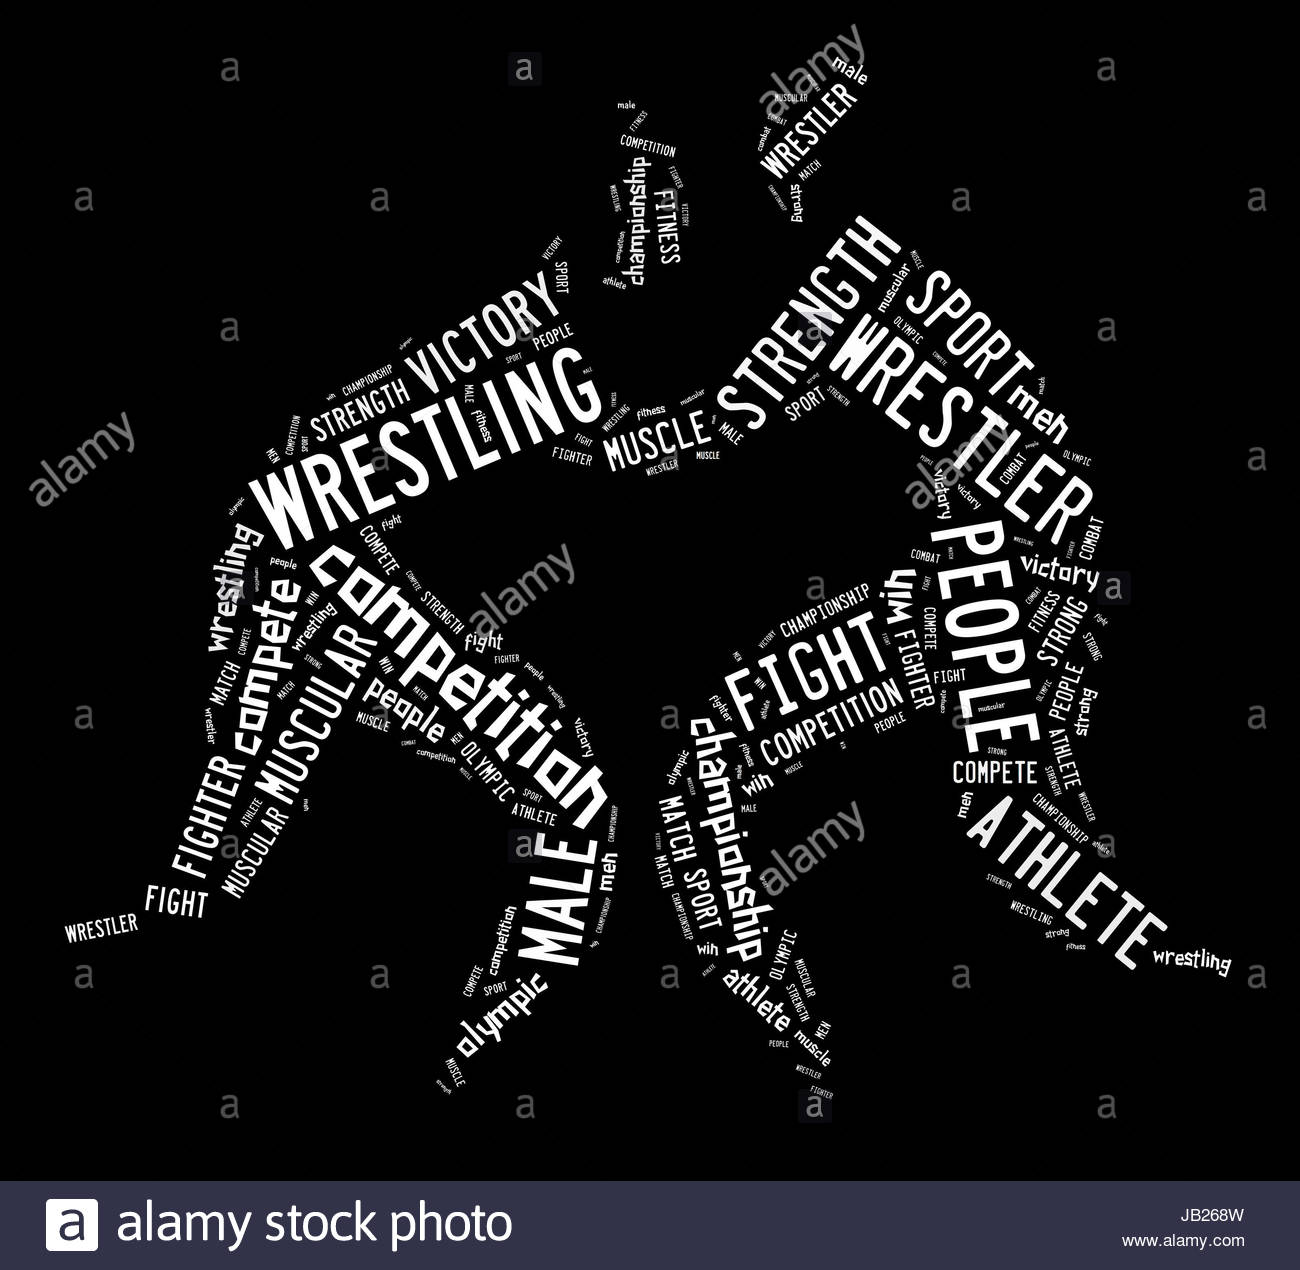 Wrestling Word Cloud With White Wordings On Black Background Stock